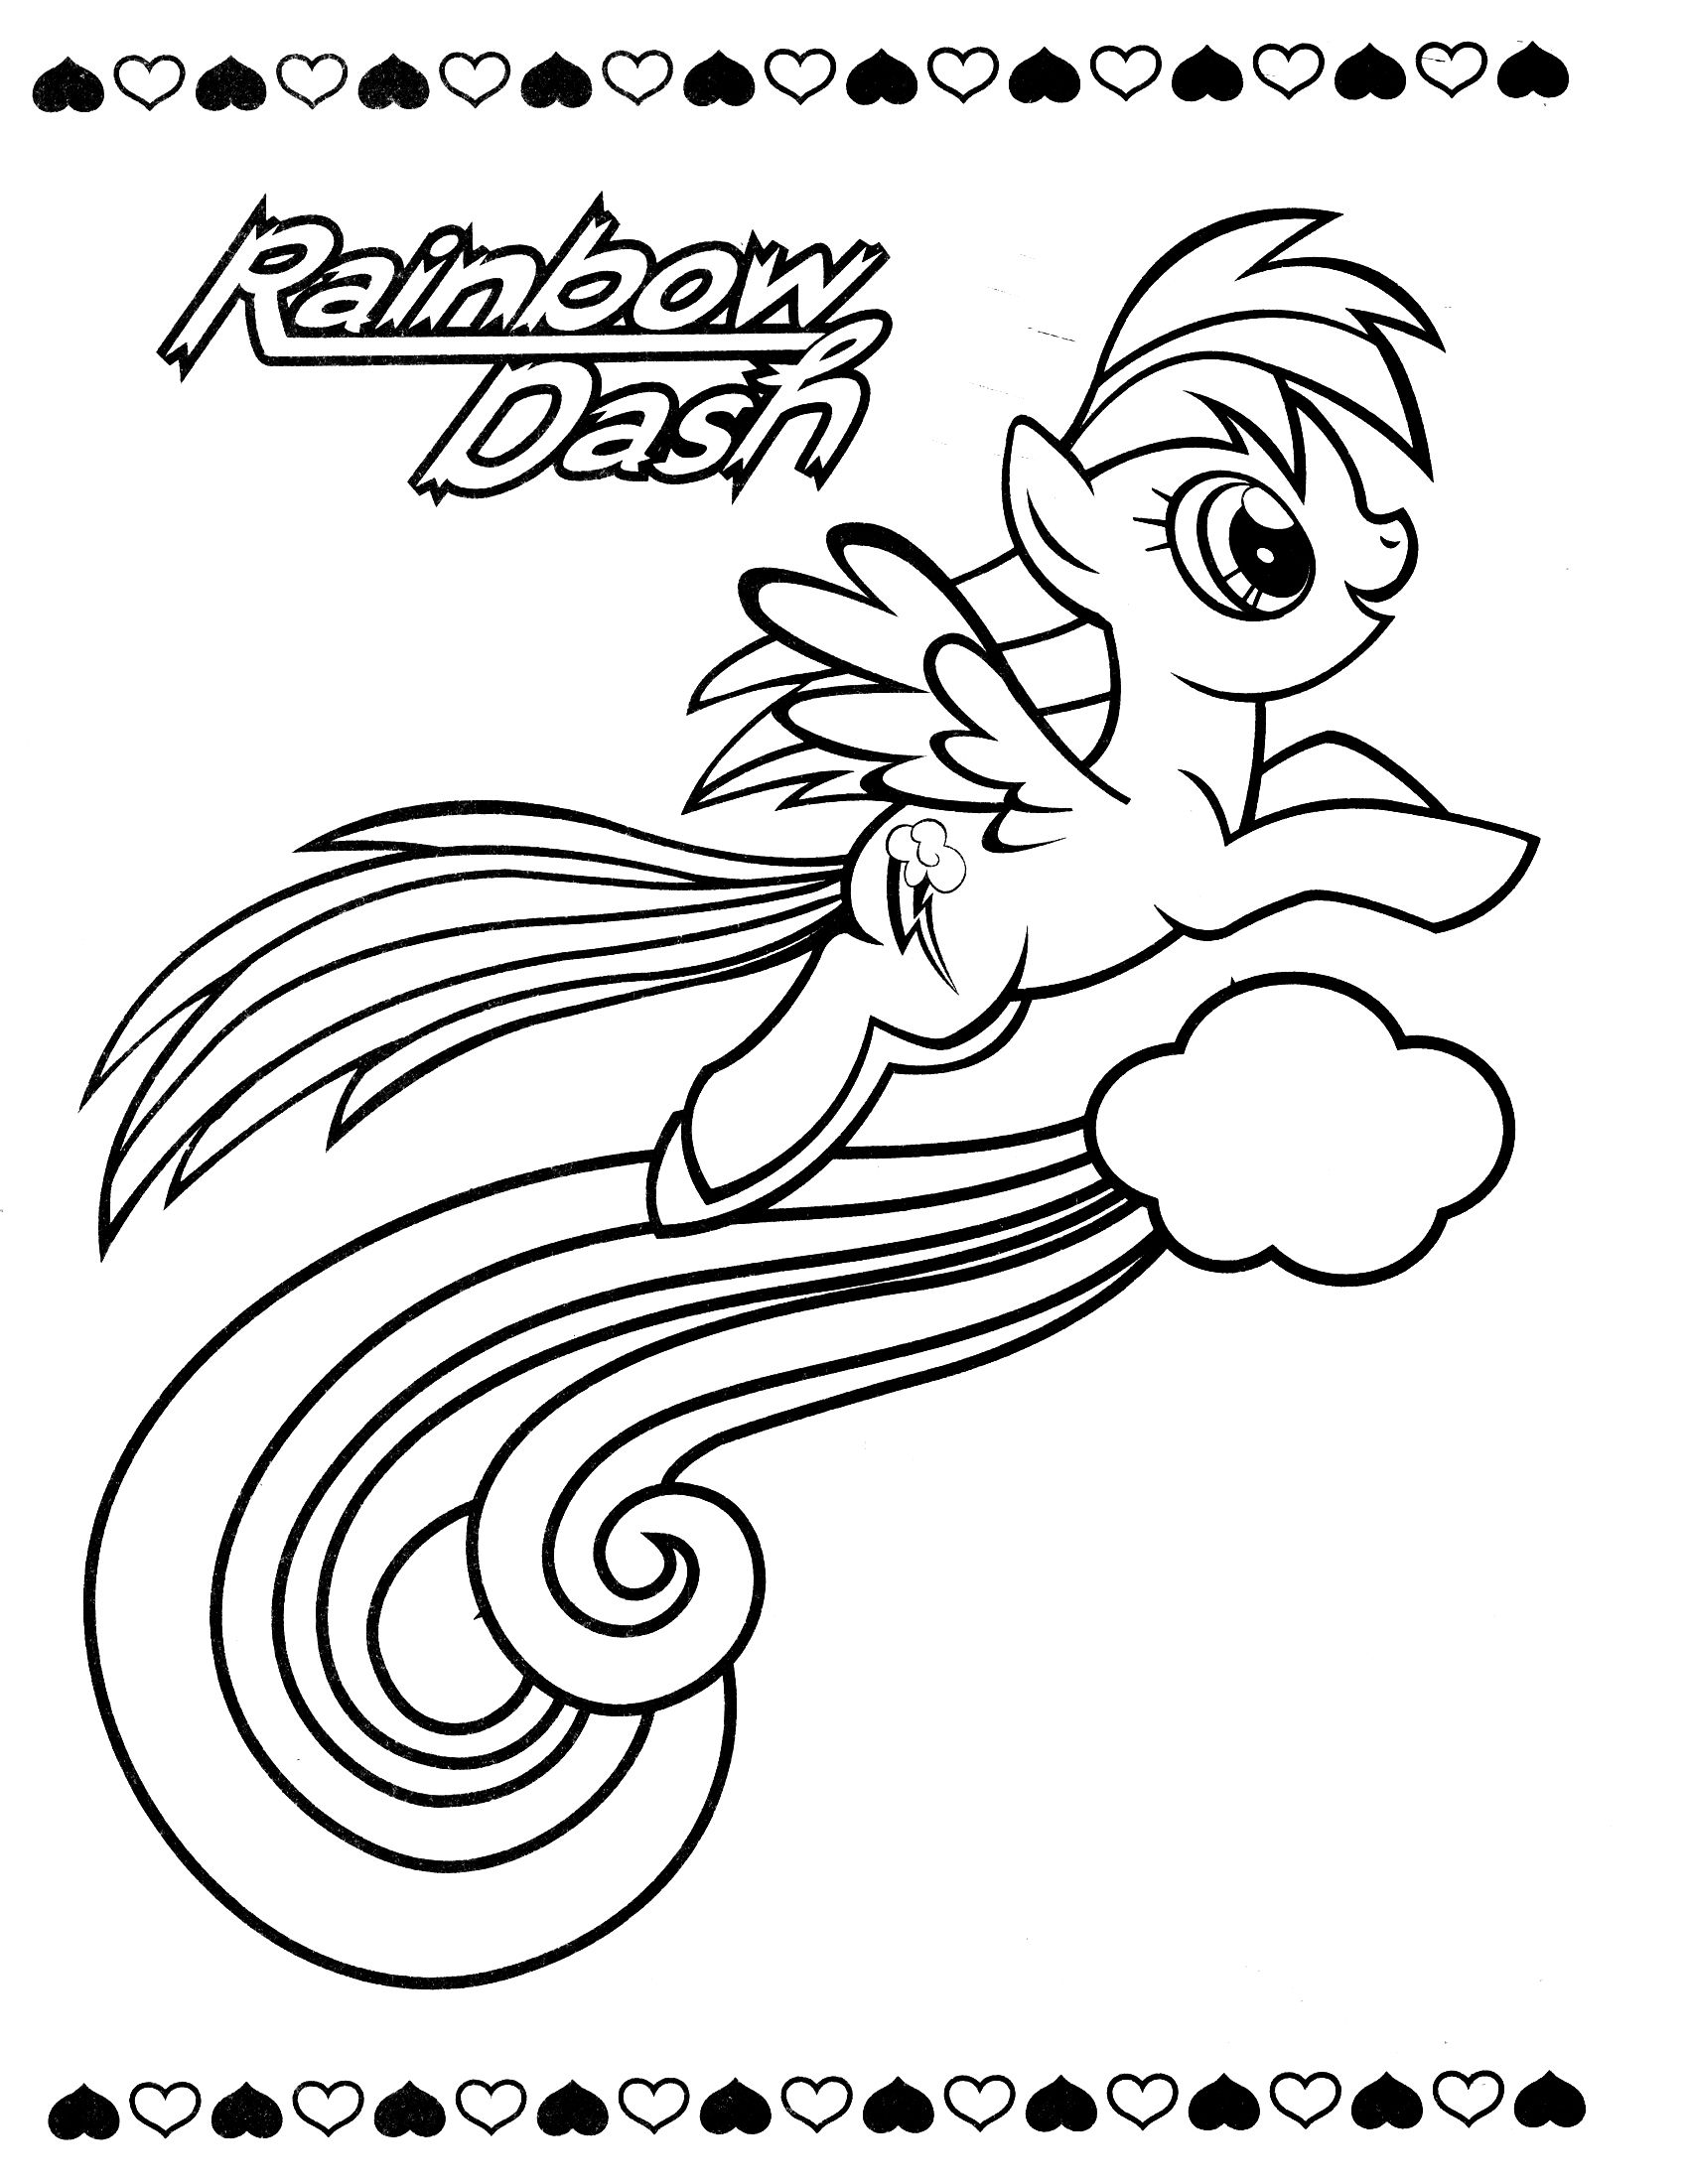 Flame heart Coloring Page